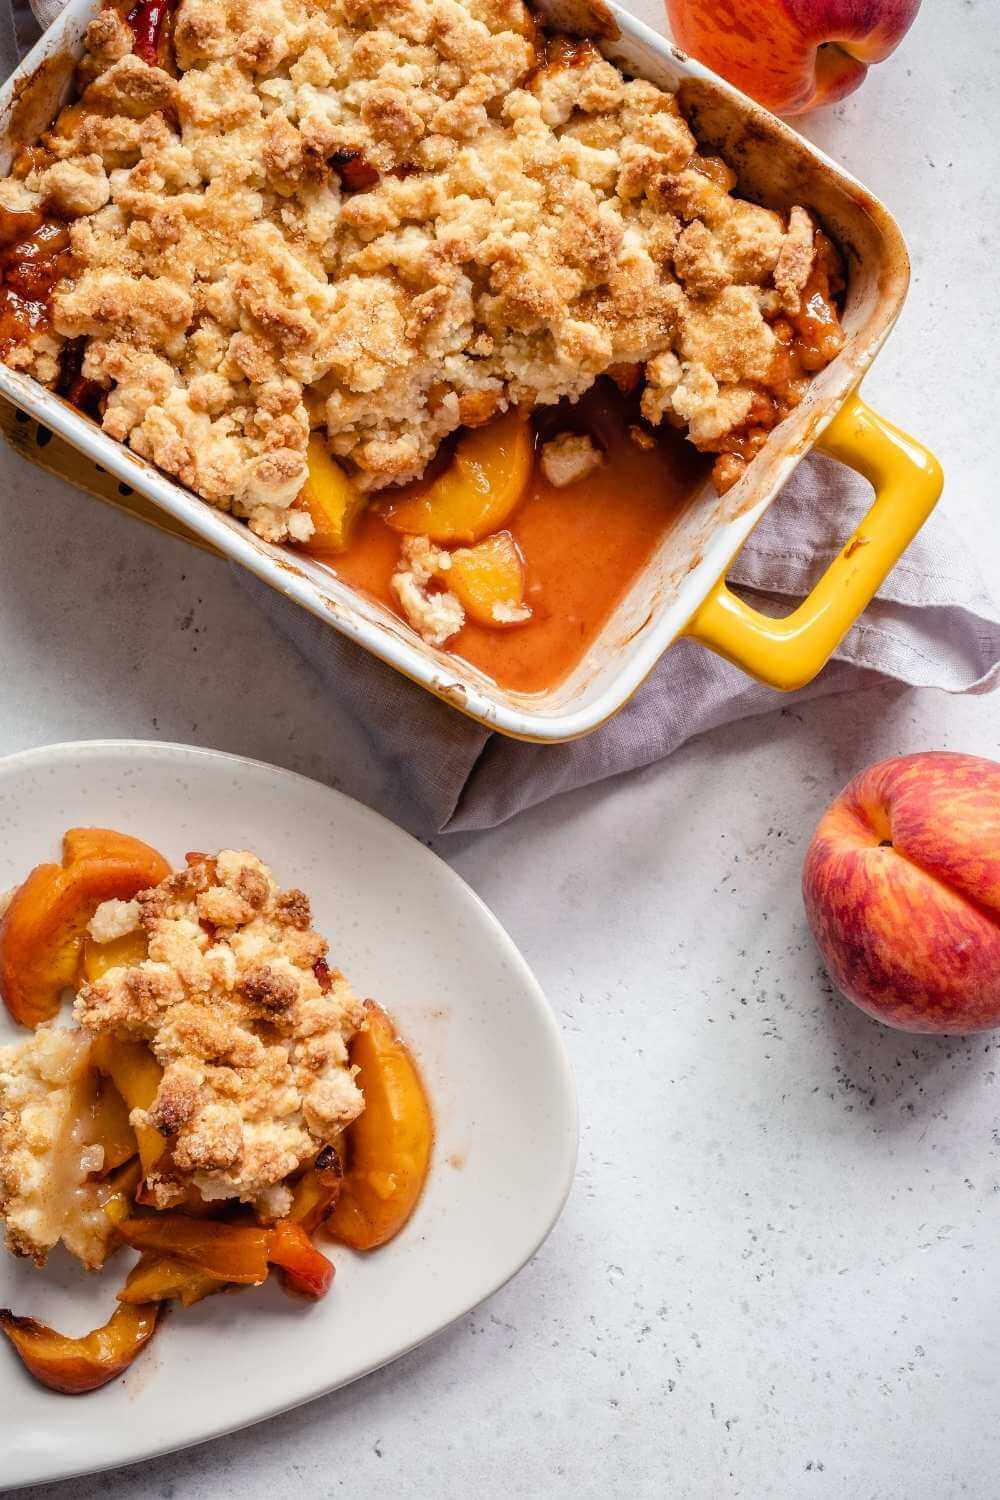 Pioneer Woman's Peach Cobbler With Canned Peaches